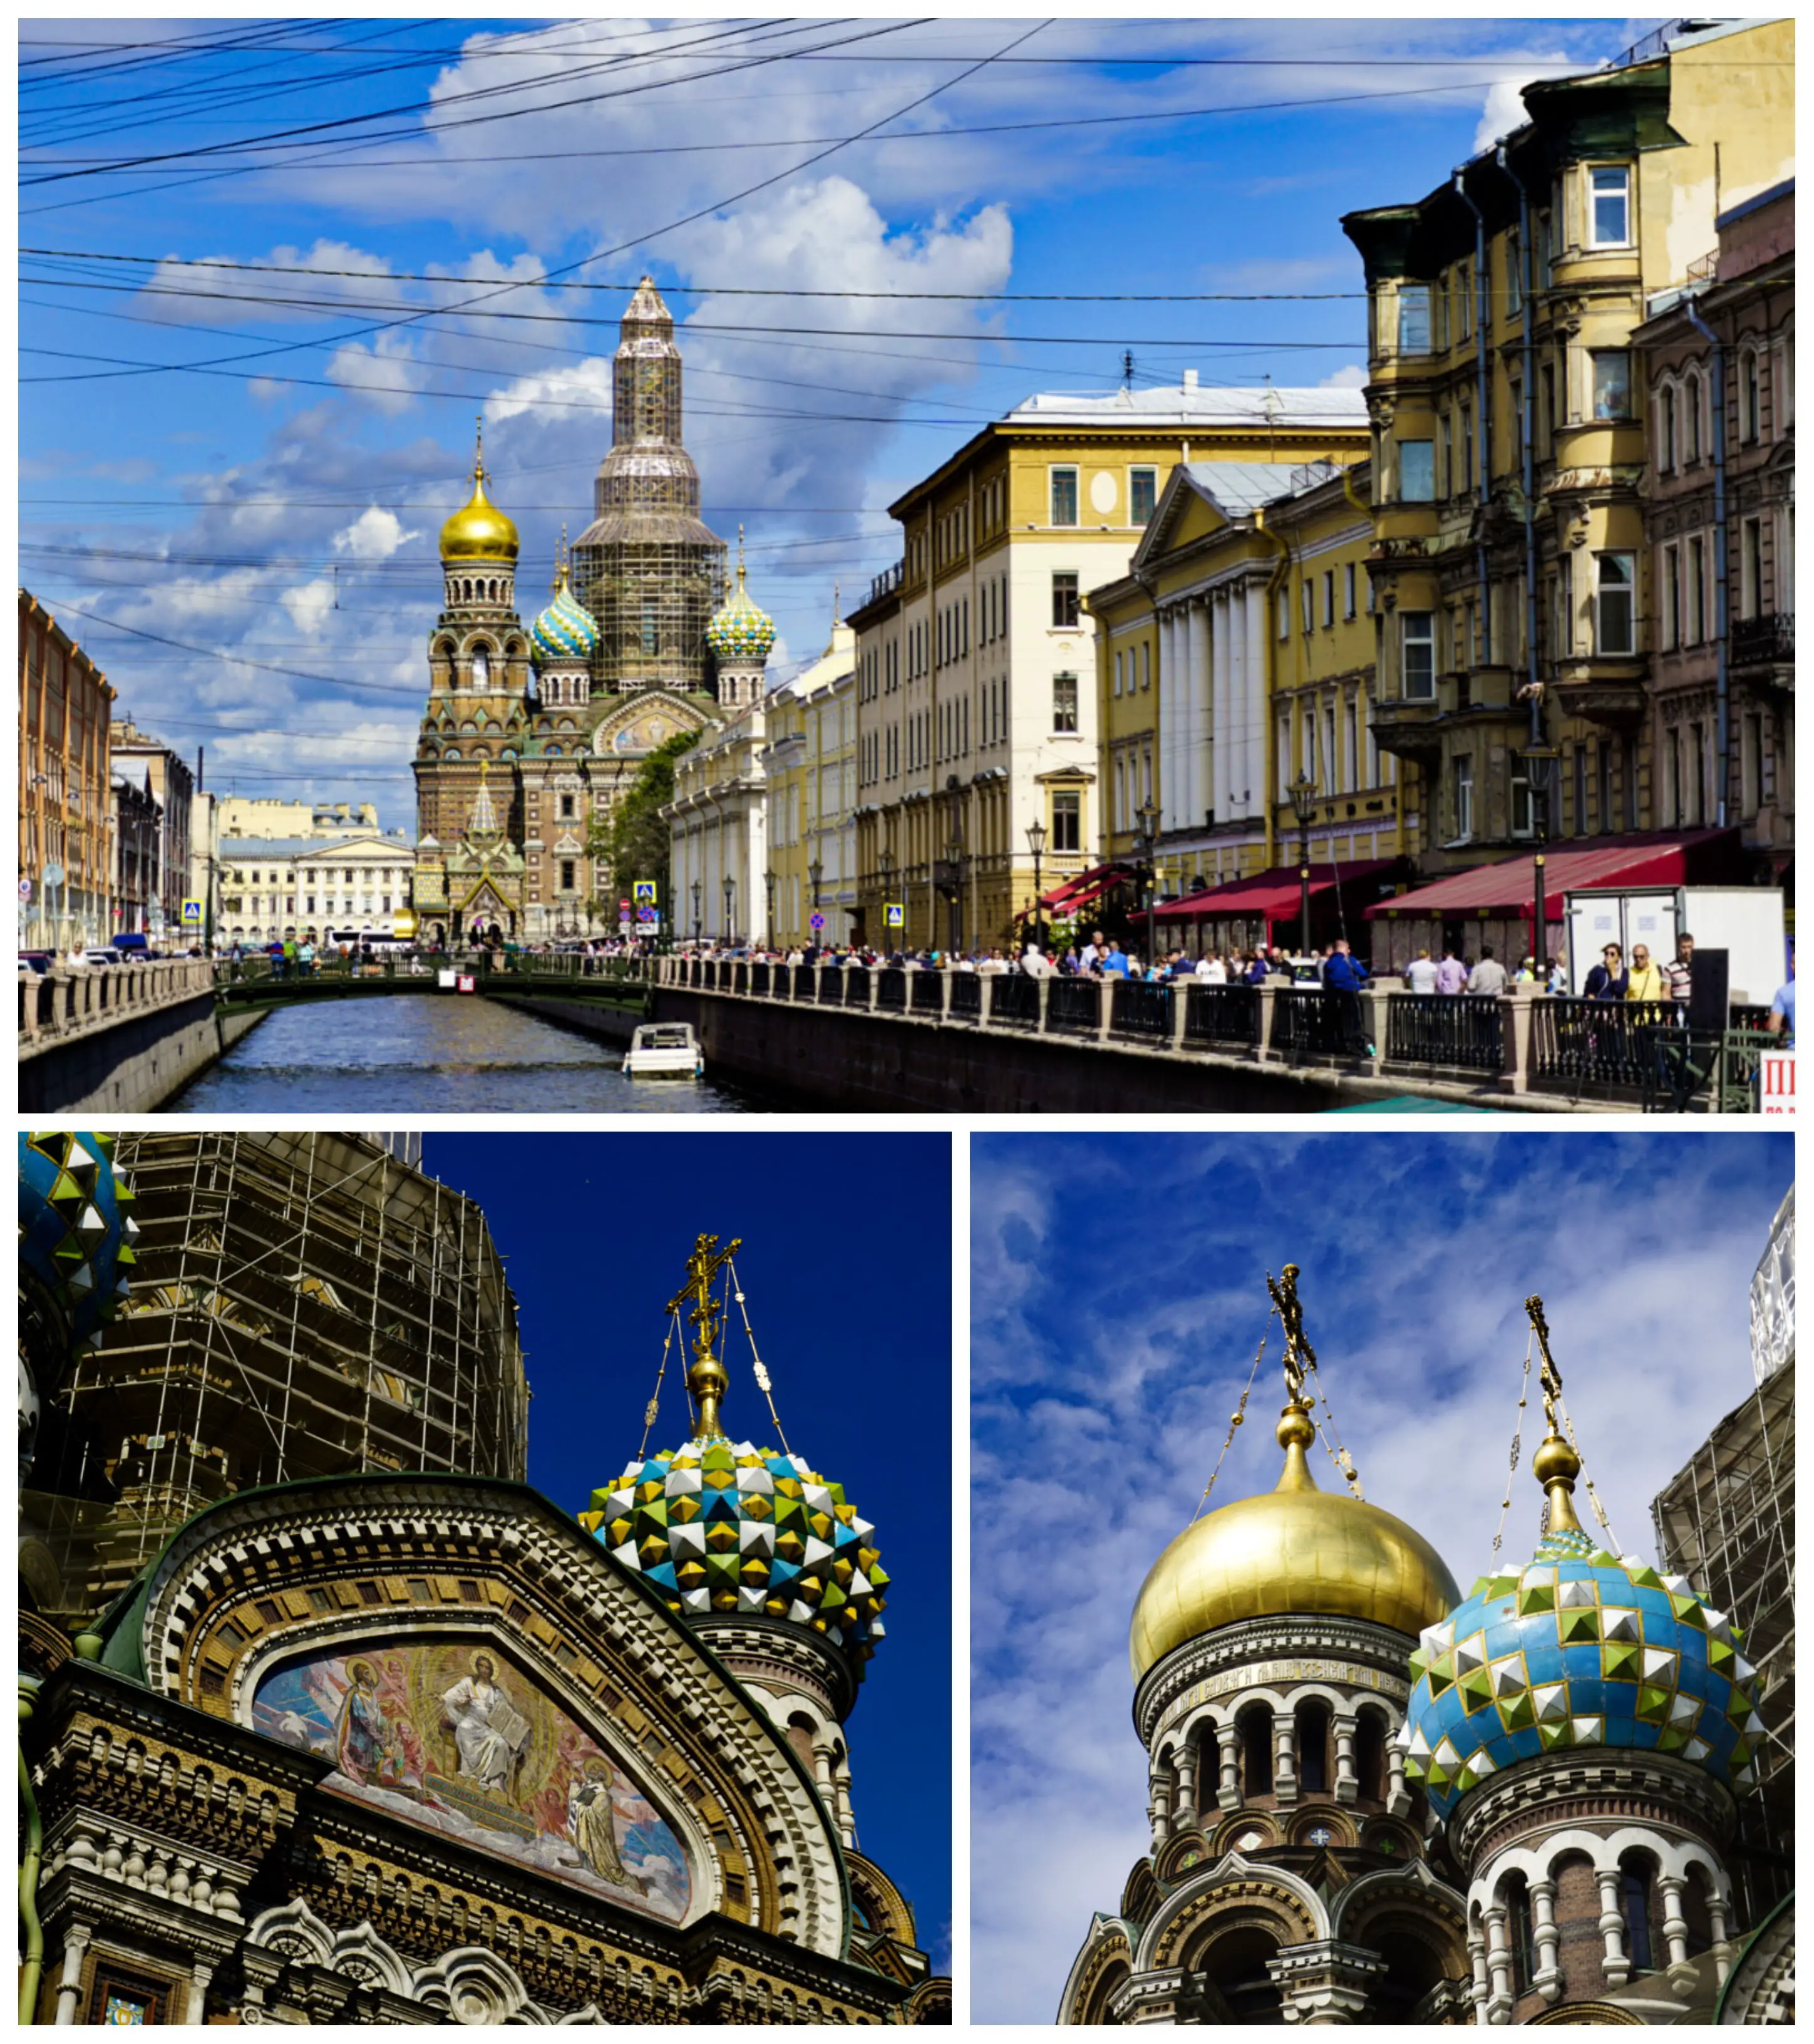 Savior on the Spilled Blood church, Saint Petersburg – Experiencing the Globe